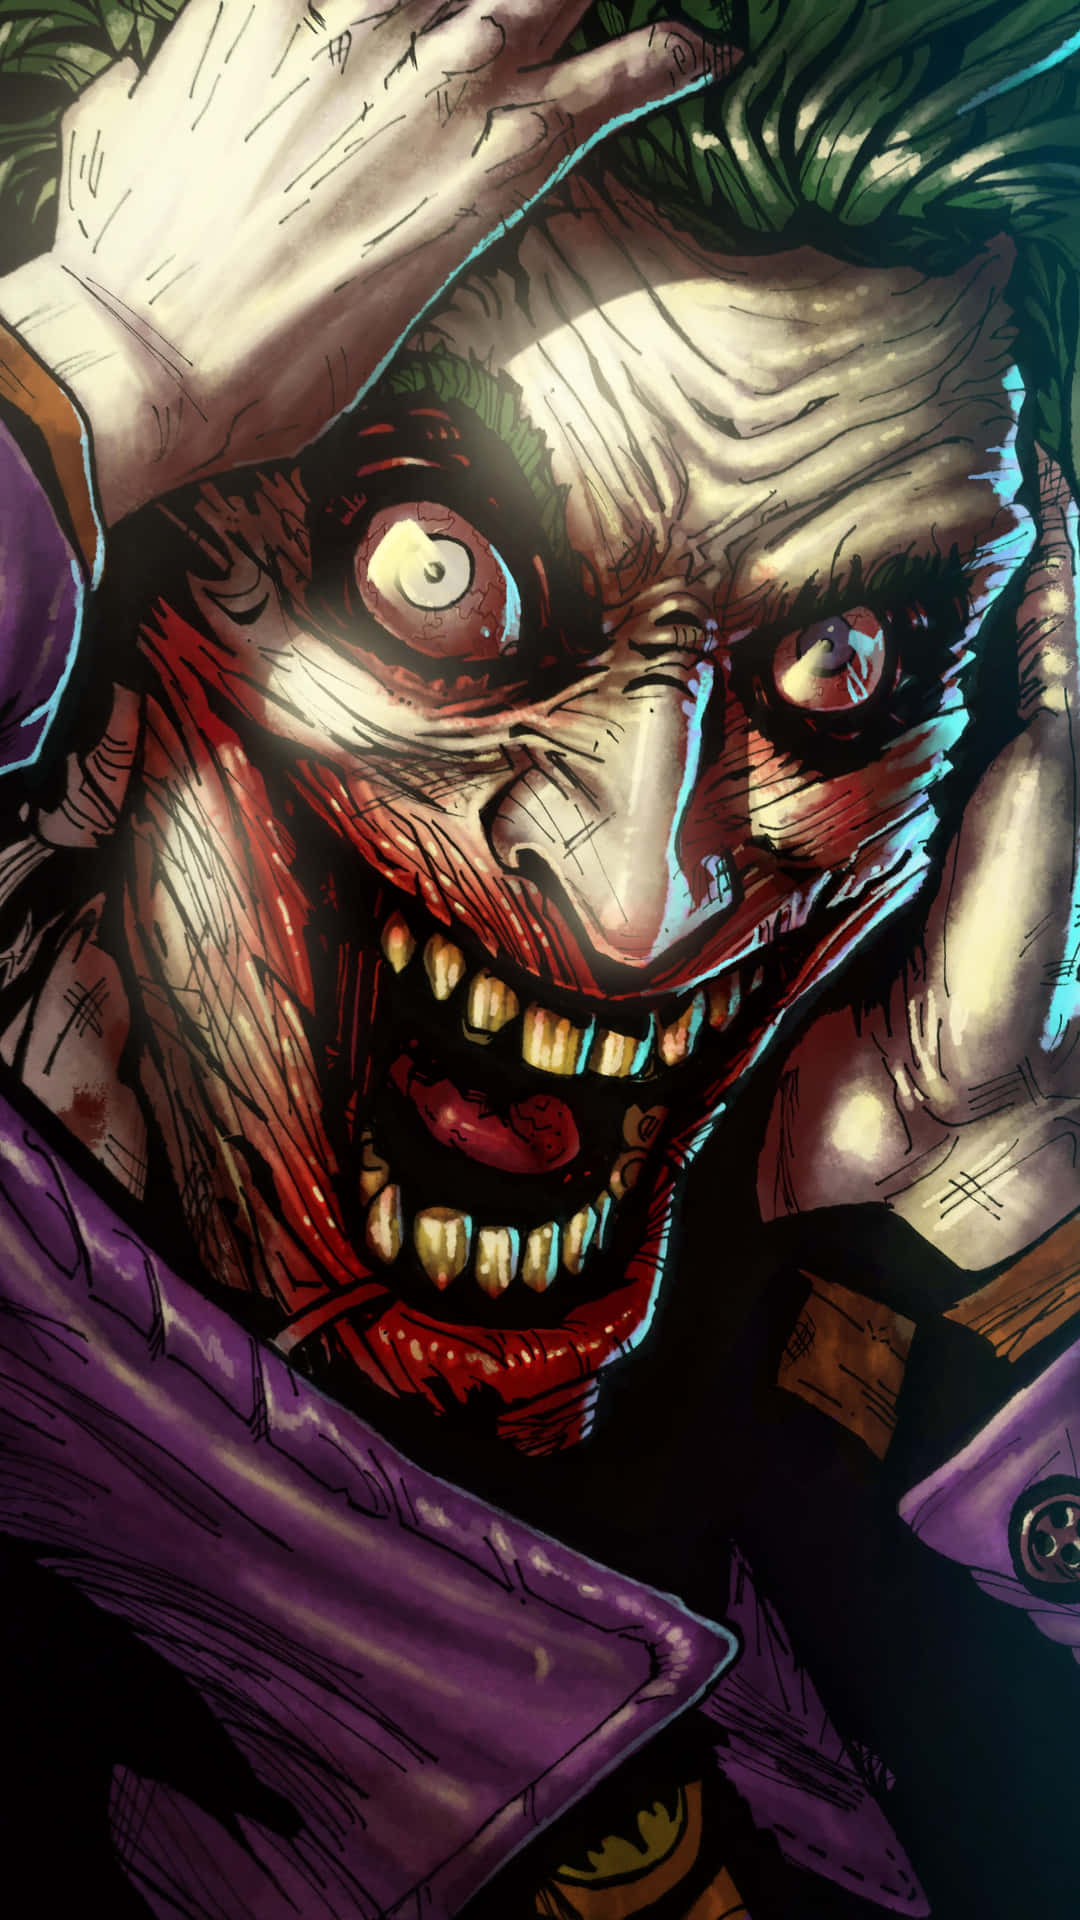 Maniacal Joker Laughing In Vibrant Colors Background